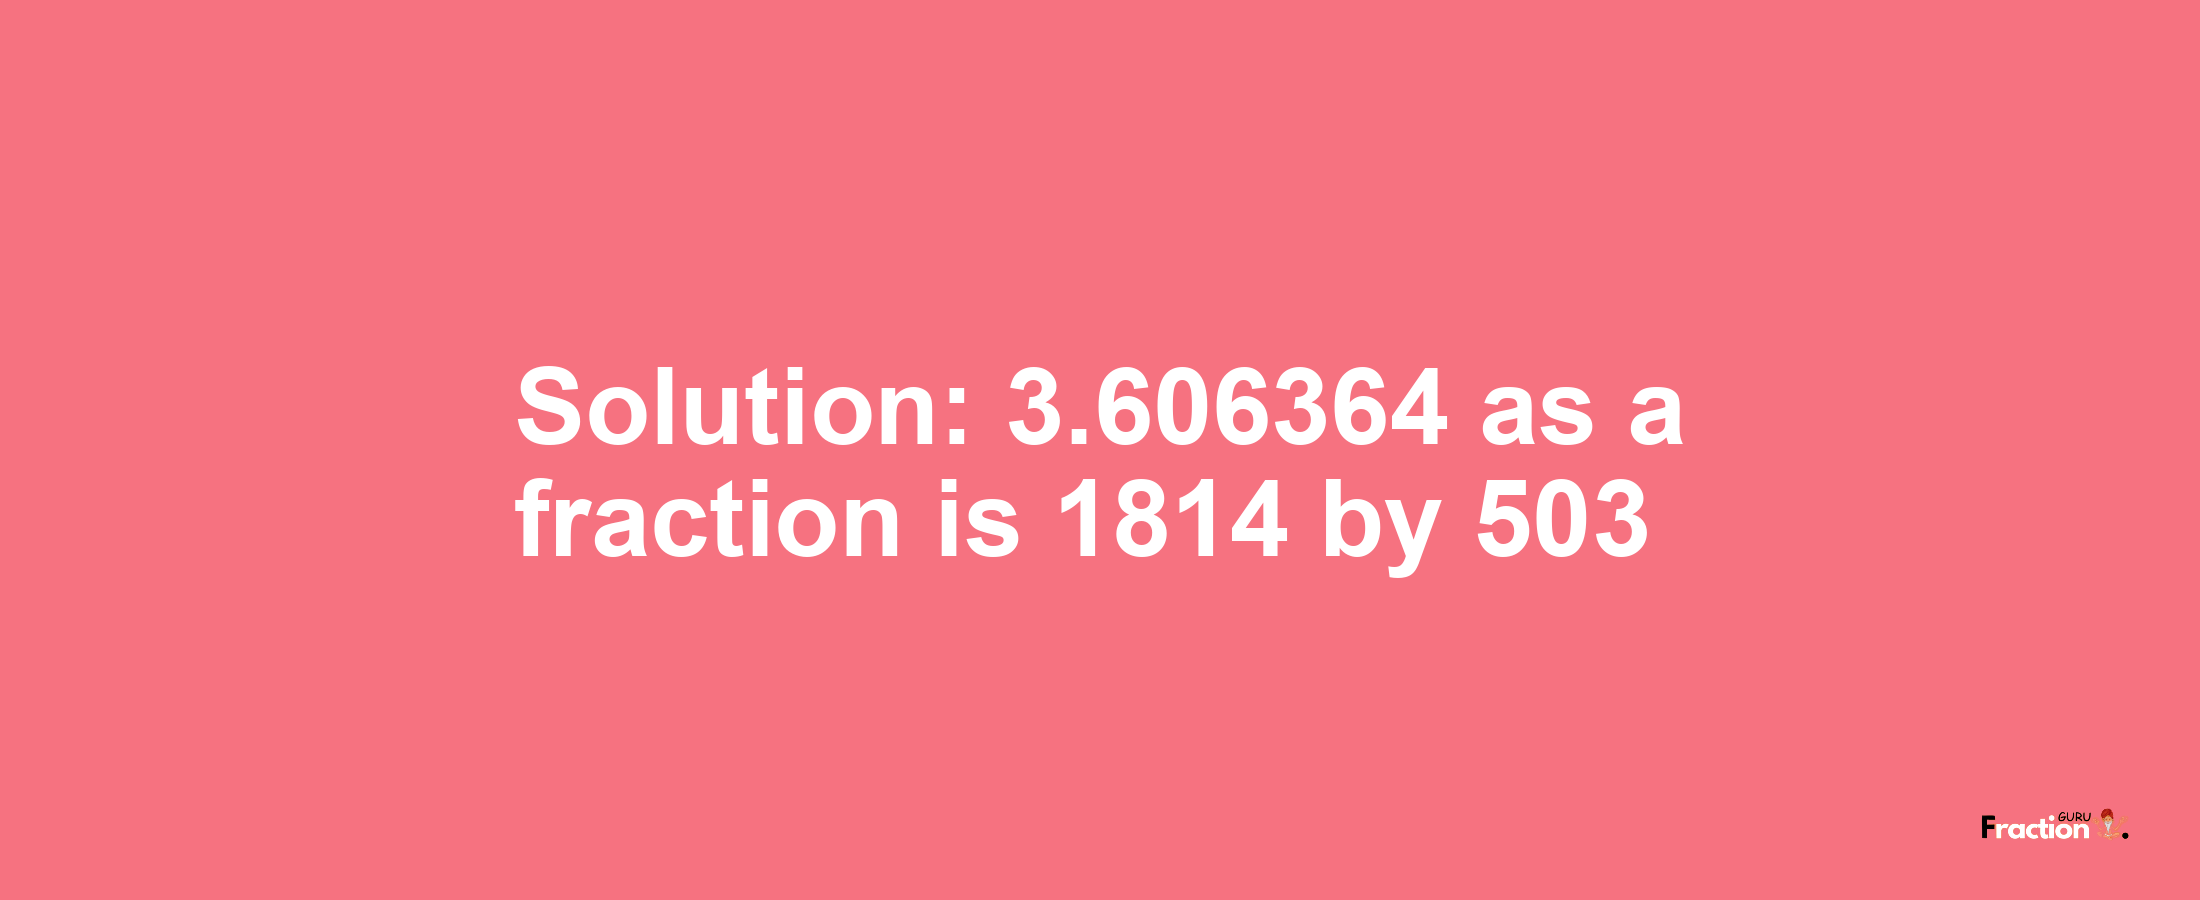 Solution:3.606364 as a fraction is 1814/503